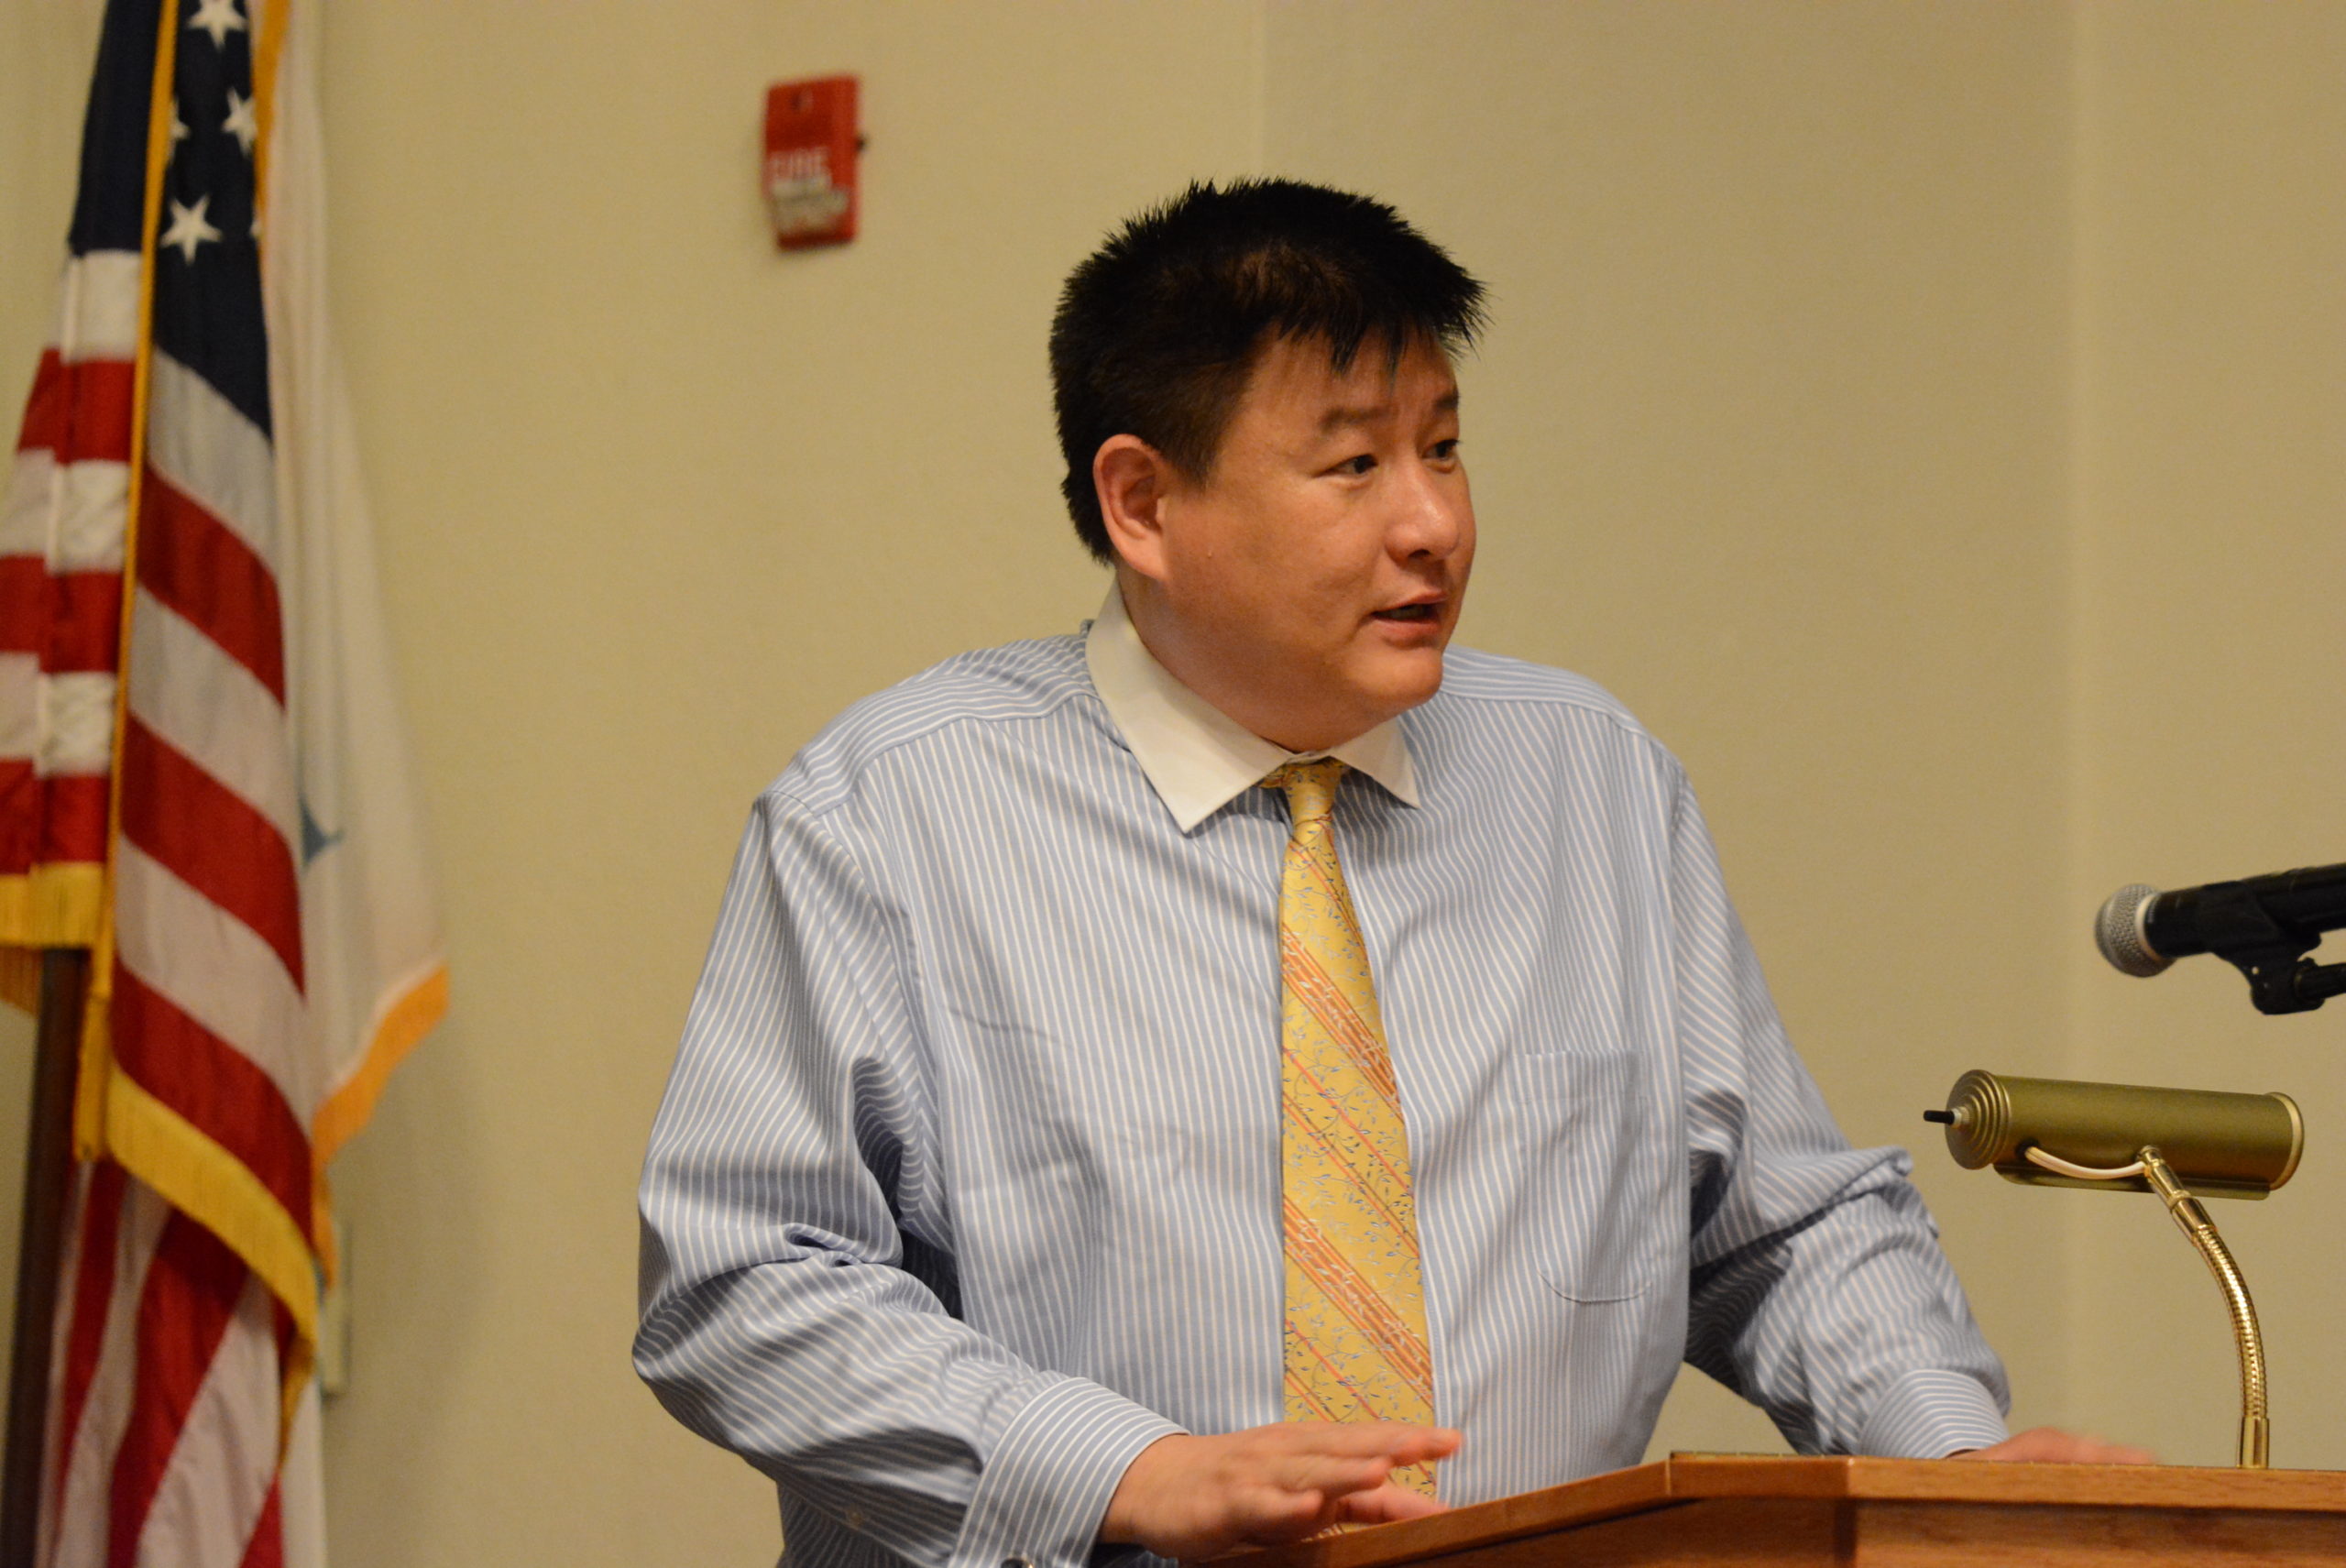 James Wu, as seen here at a Meet the Candidates event in May, said the candidate swap was necessary and not a first in the village. (Photo by Janelle Clausen)